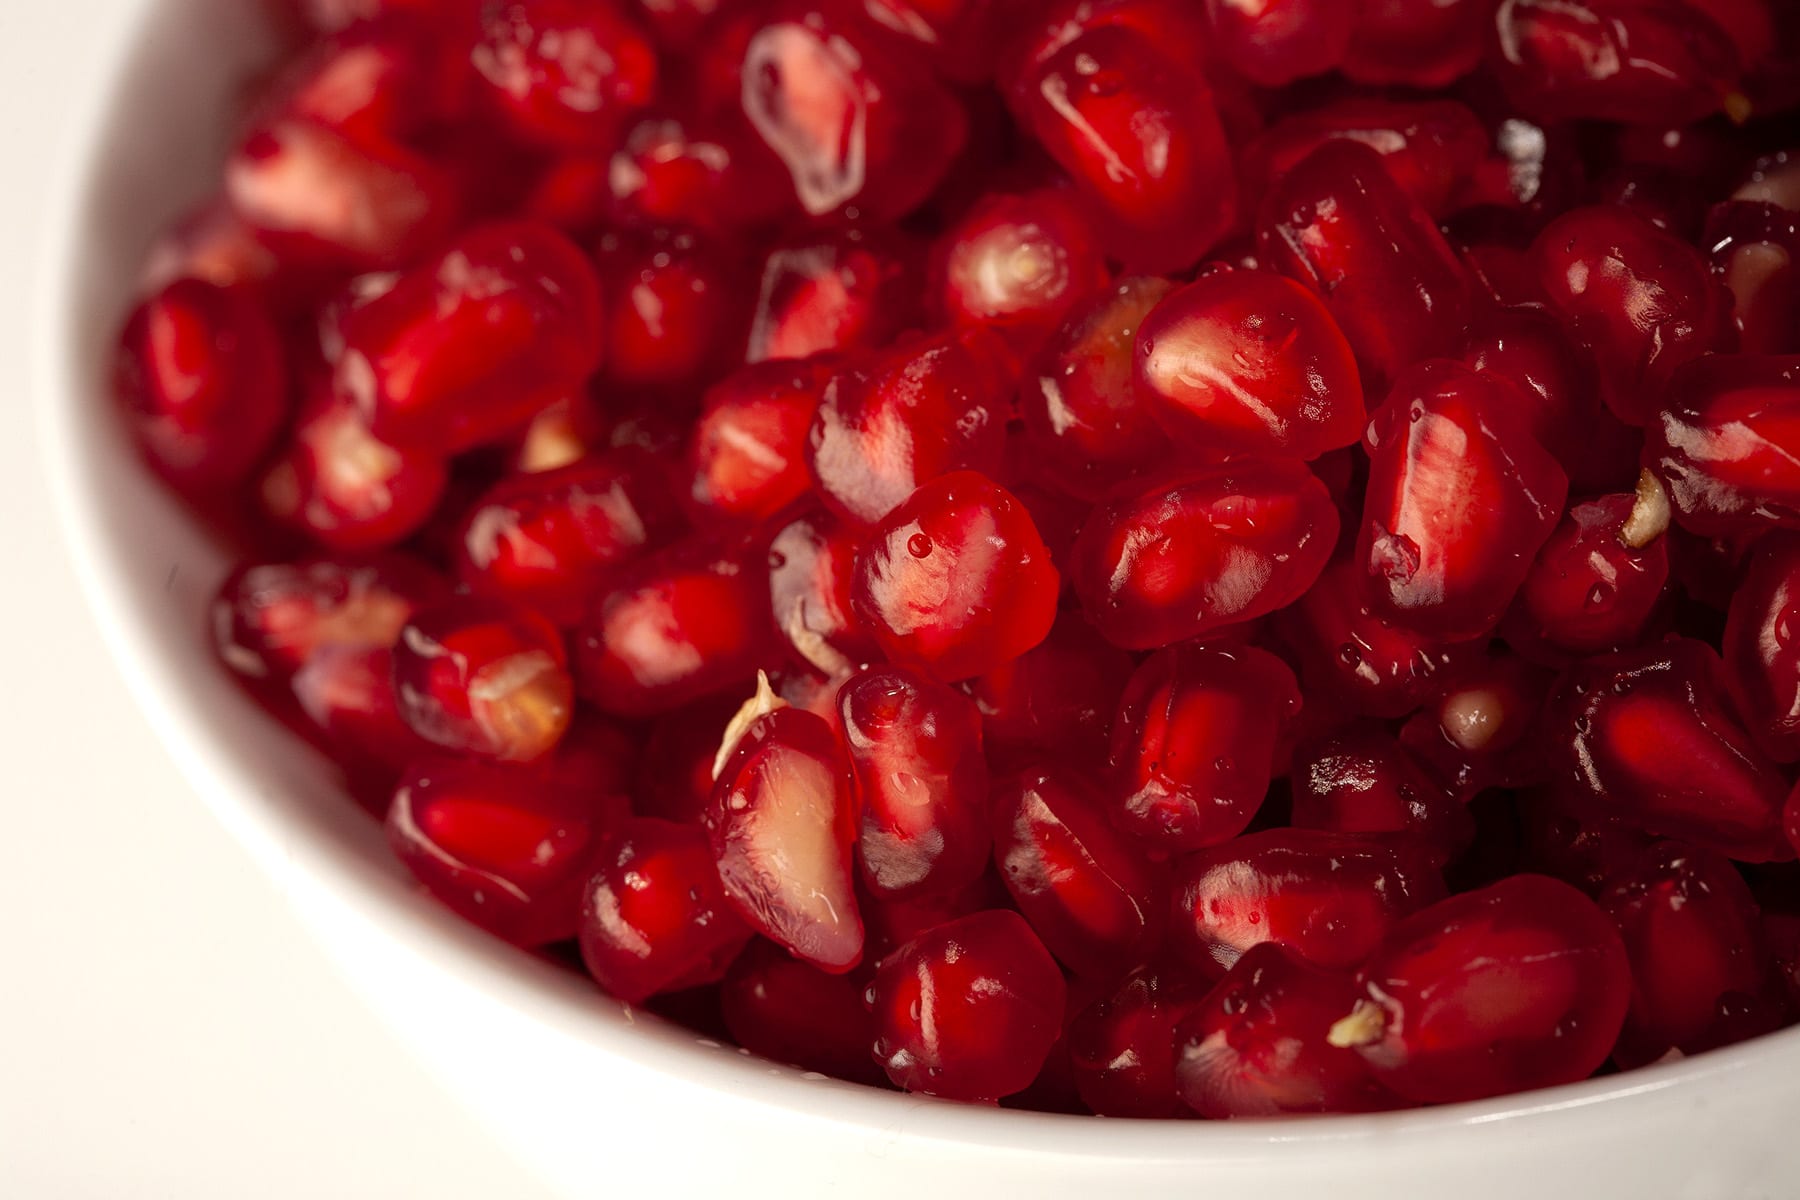 A close up view of a bowl of pomegranate seeds.